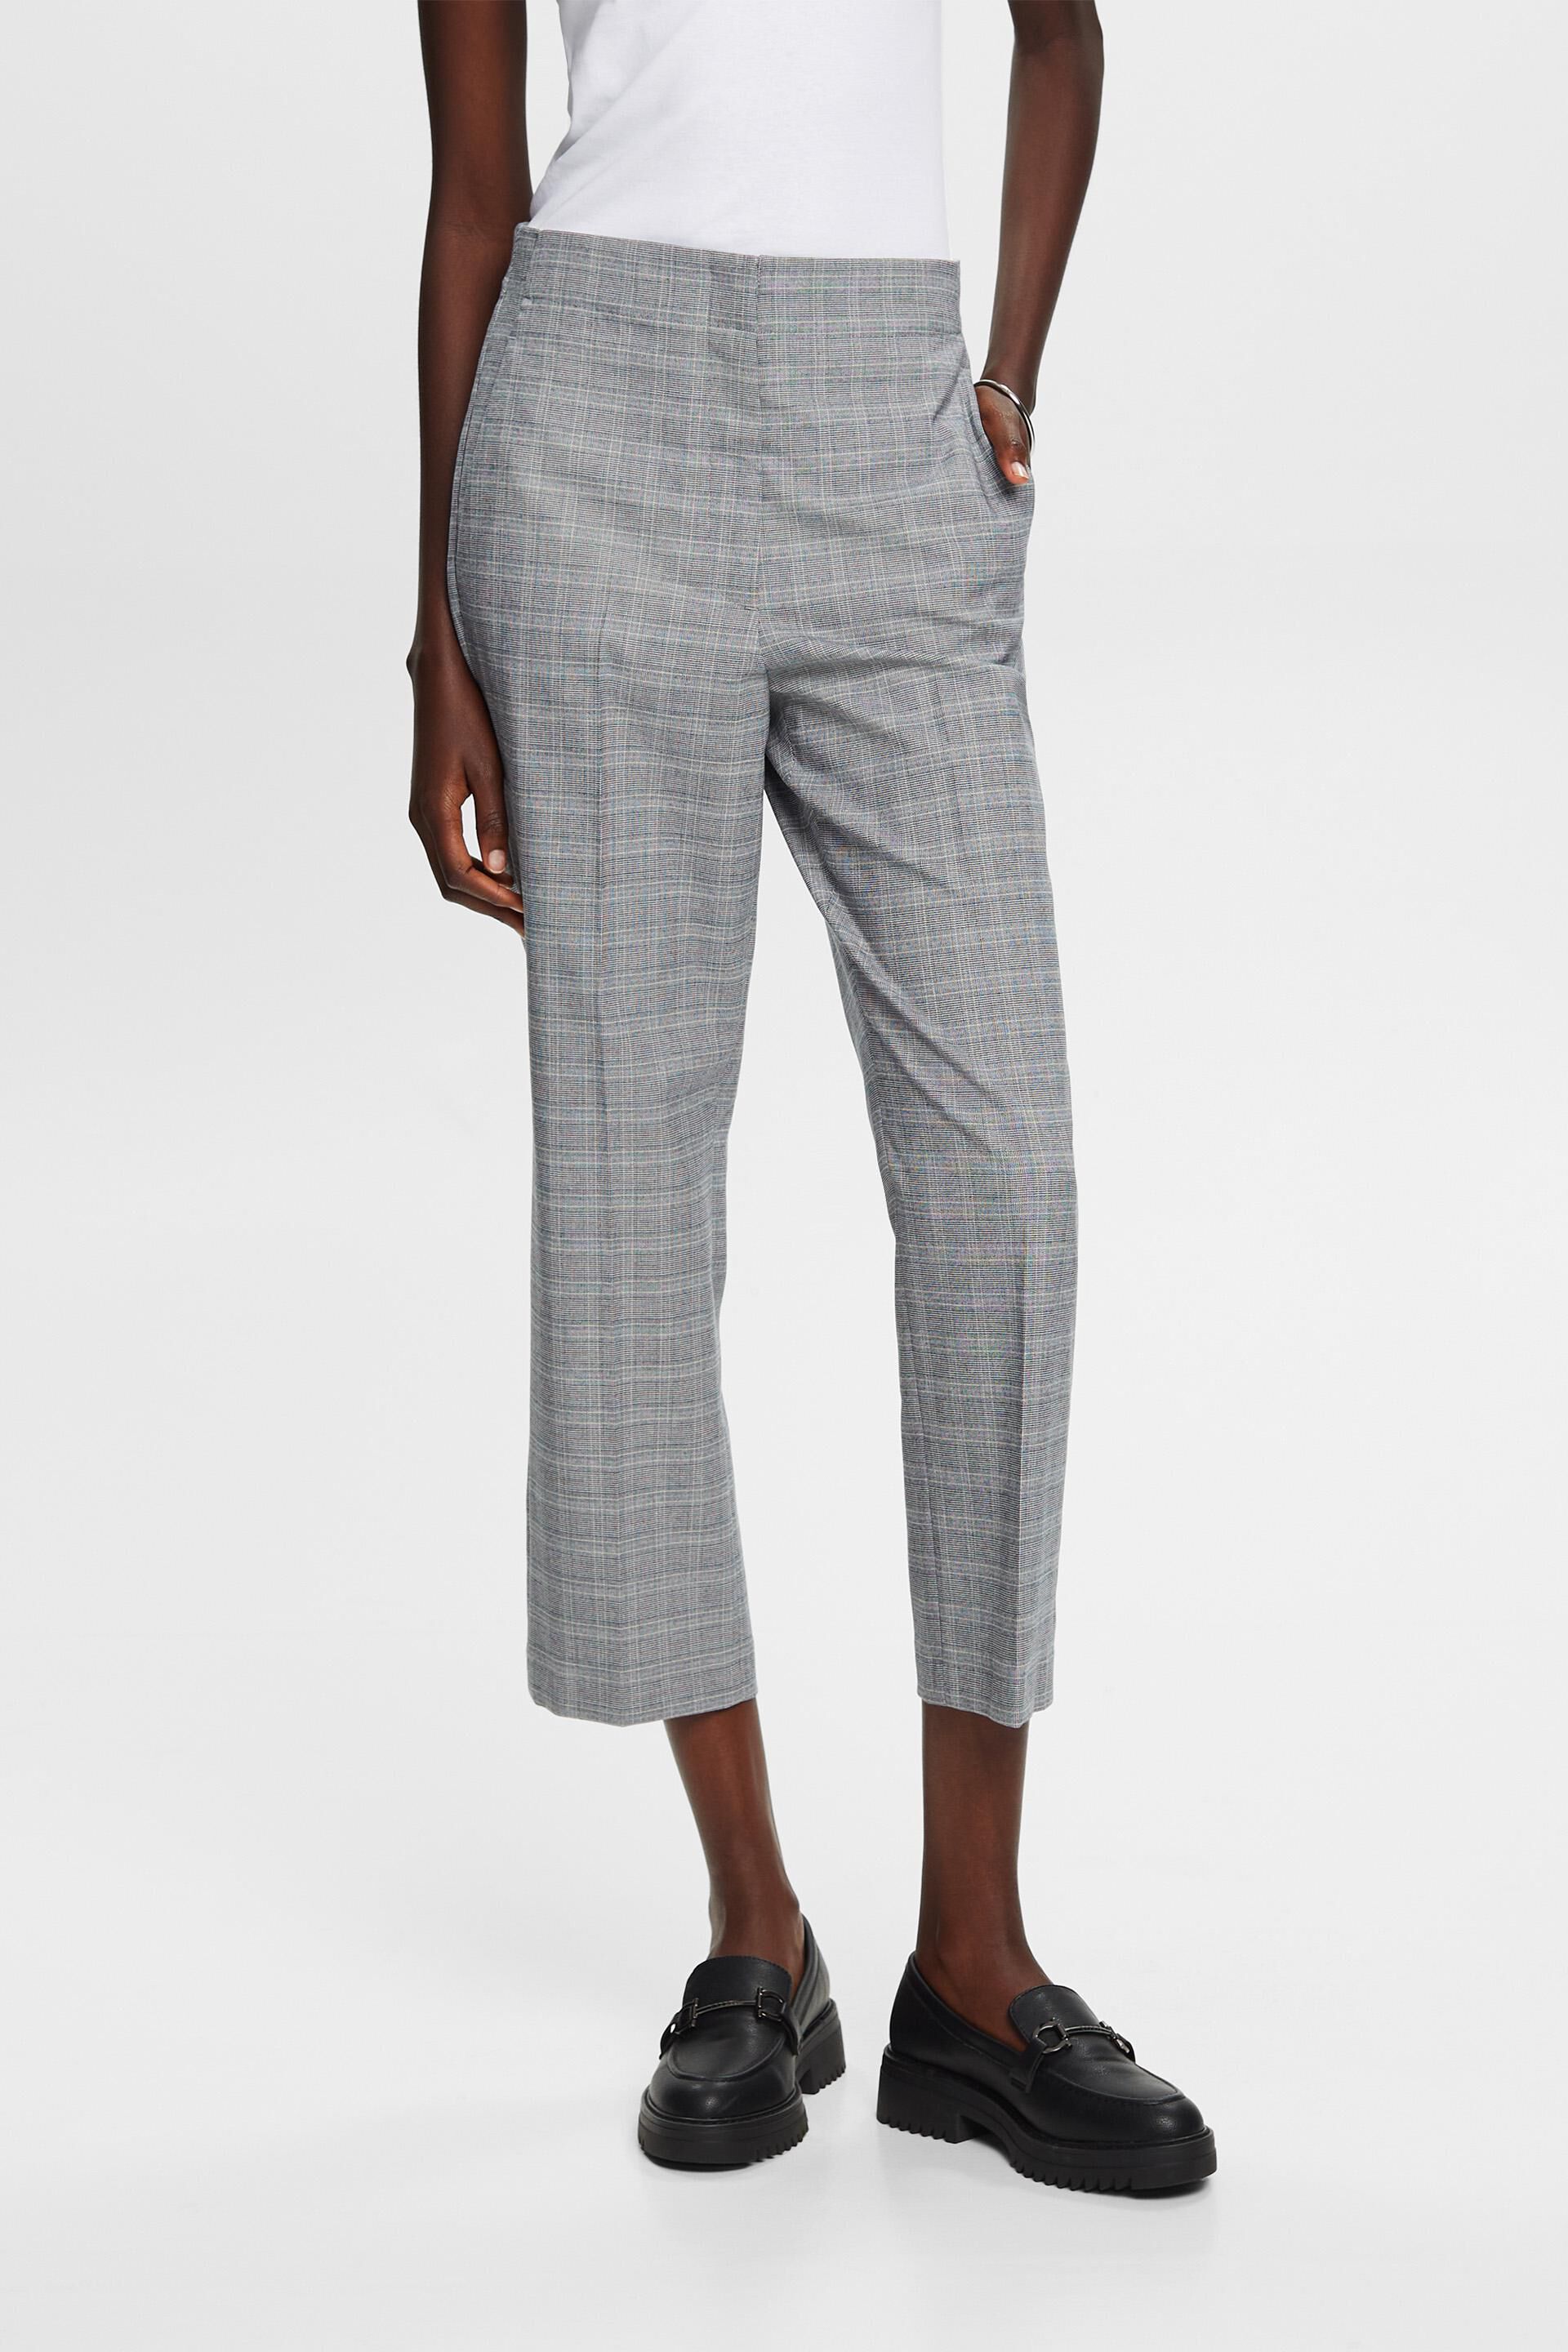 Esprit trousers Mix & checked Match: kick-flare